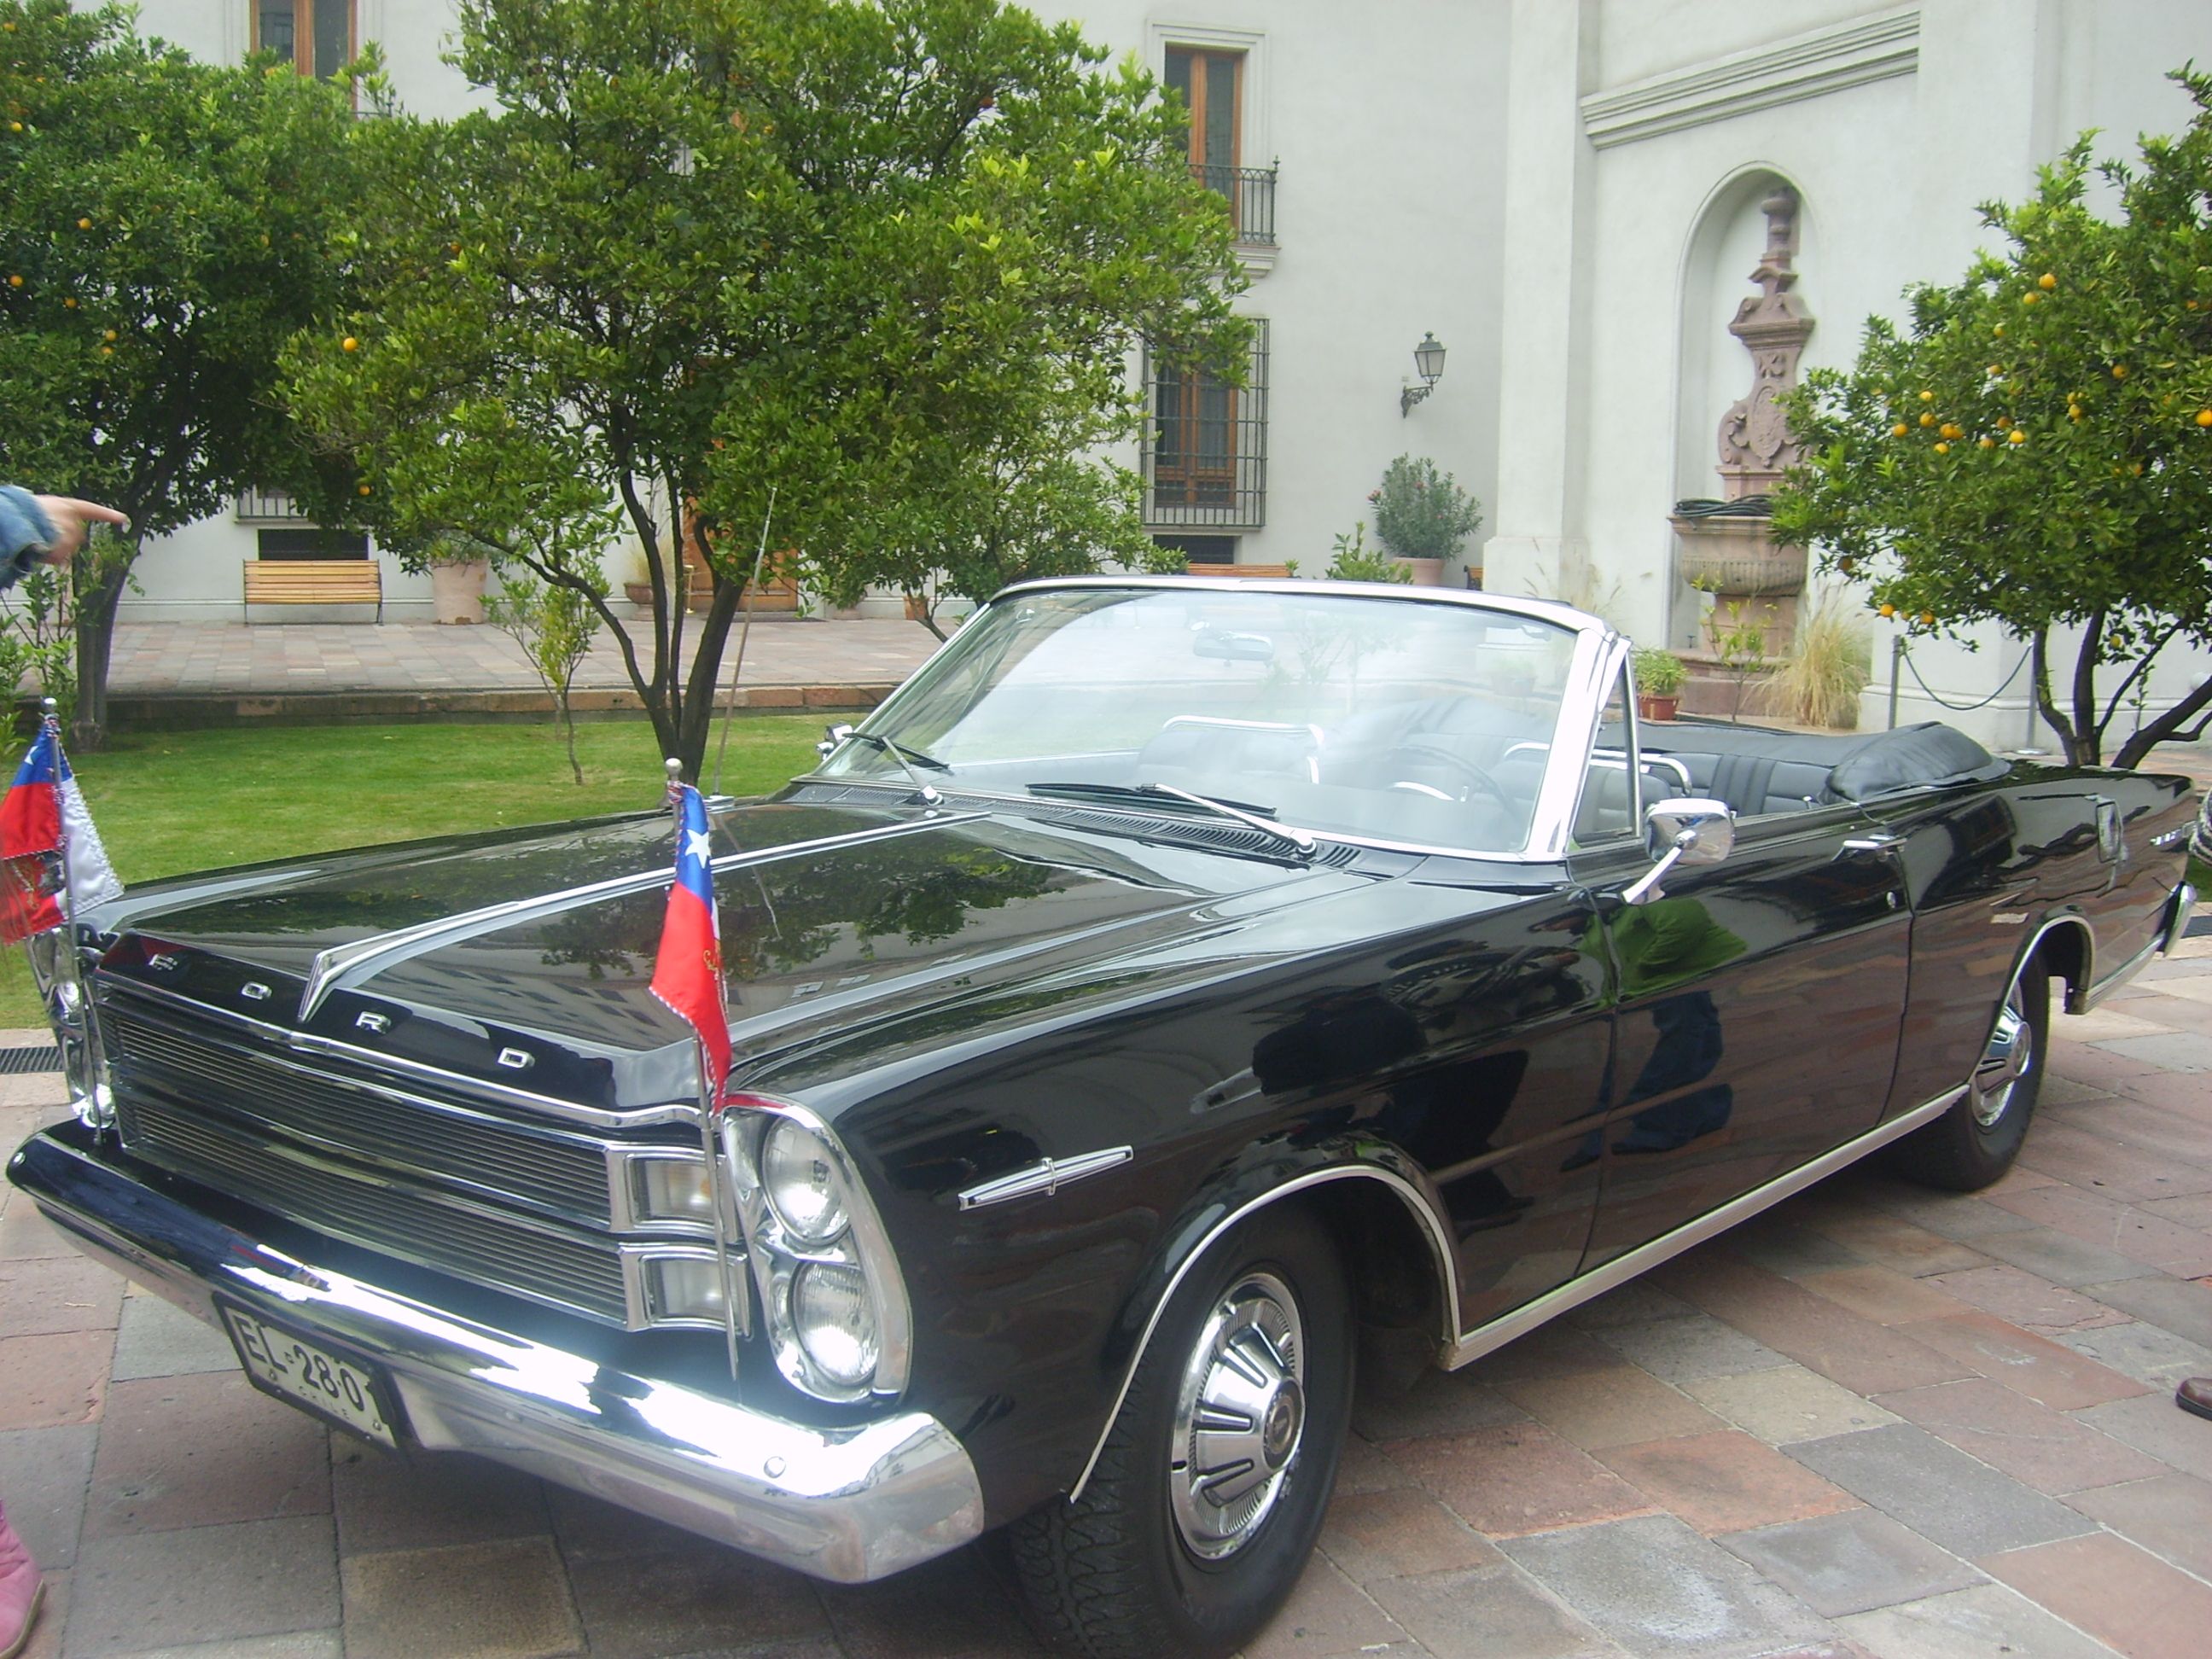 The 1966 Ford Galaxie was one of the most successful Ford models